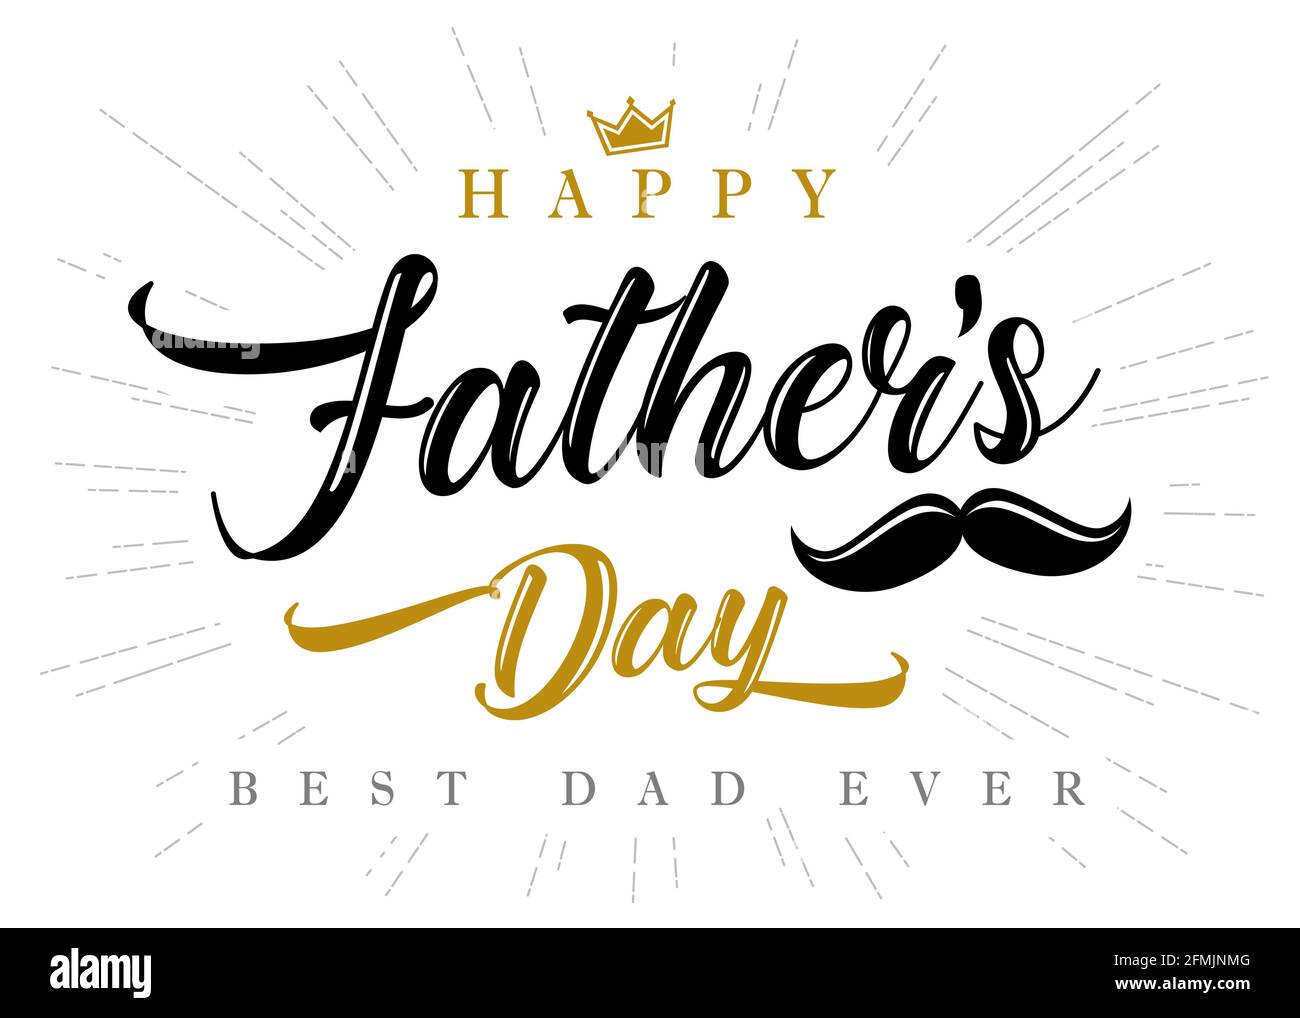 Happy Fathers Day for best dad ever calligraphy greeting poster. Father's day sale promotion typography banner with mustache. Vector illustration Stock Vector